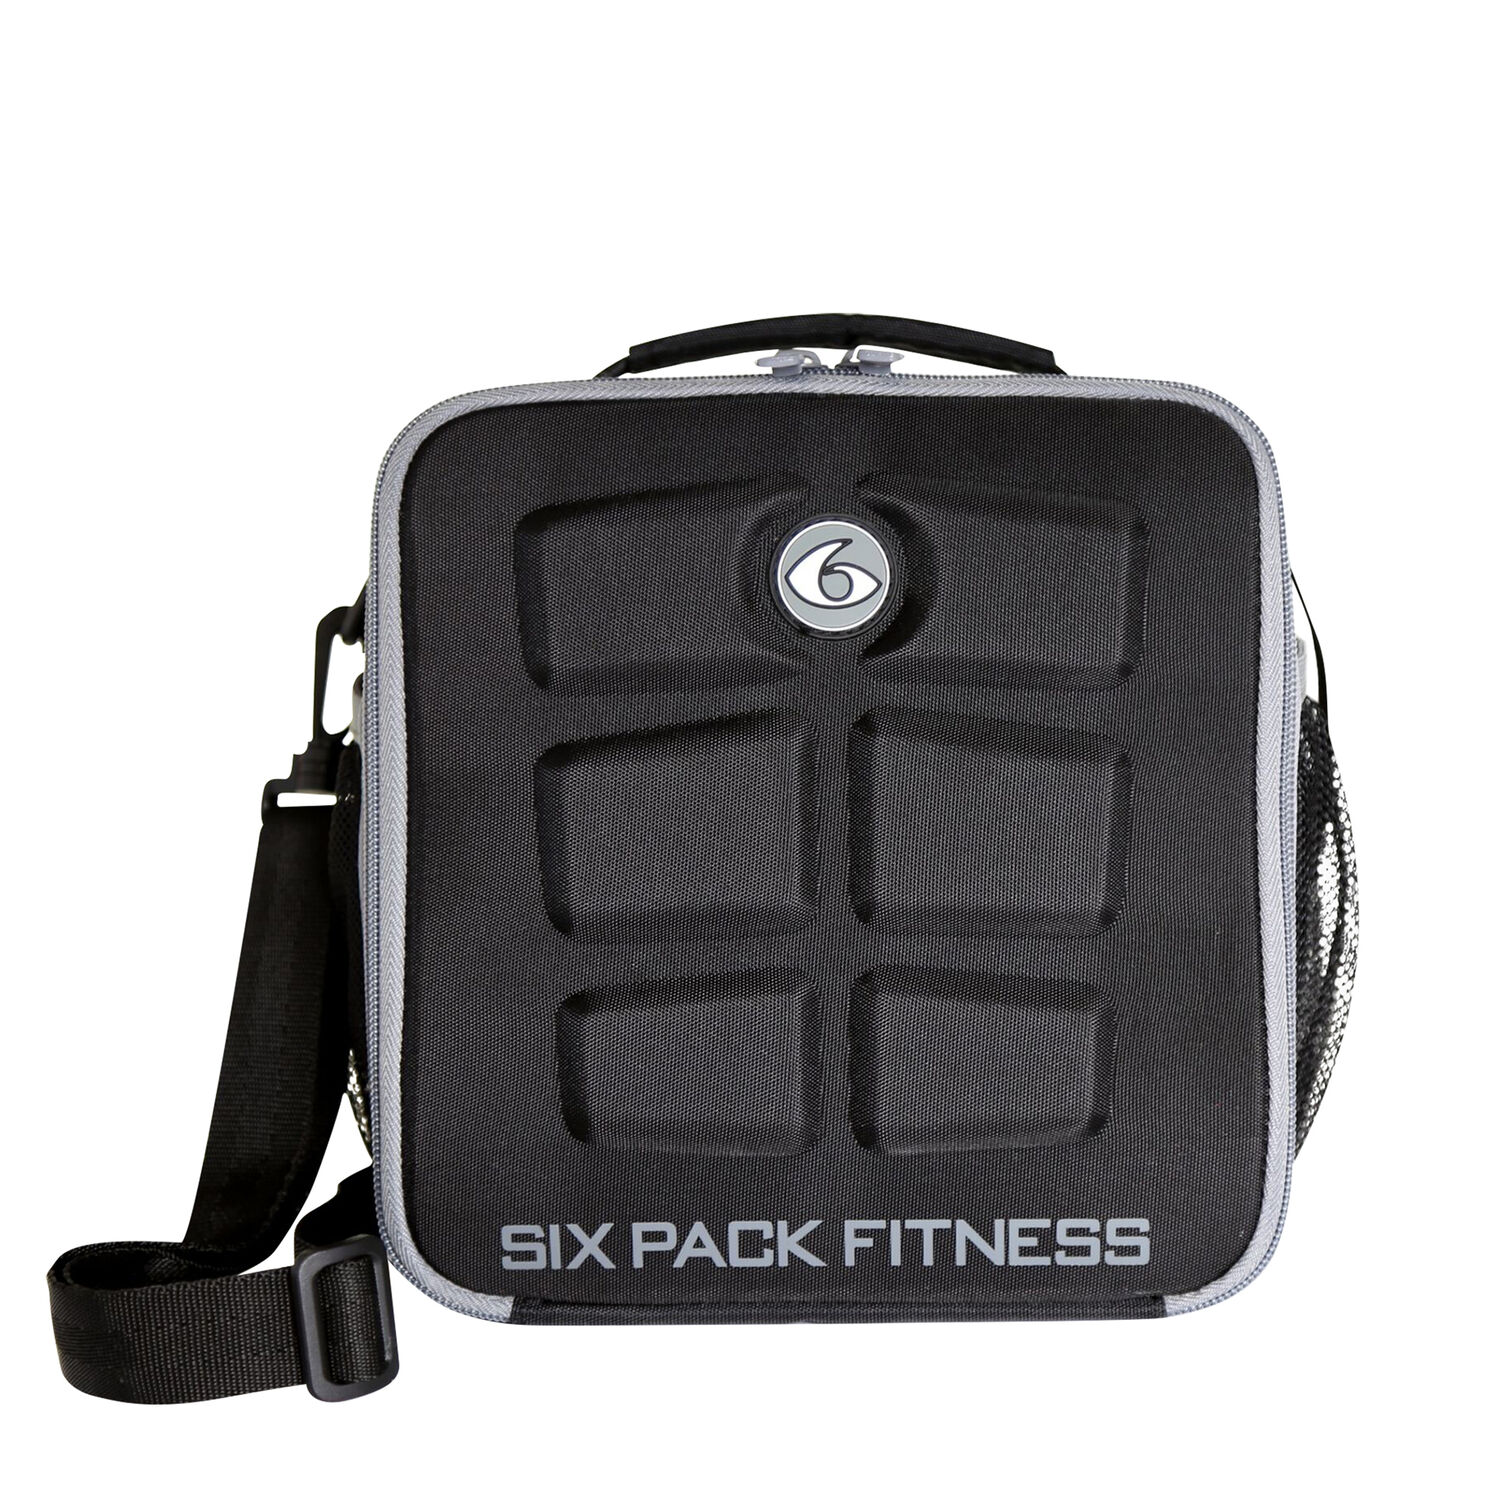 6 Pack Fitness™ Cube -